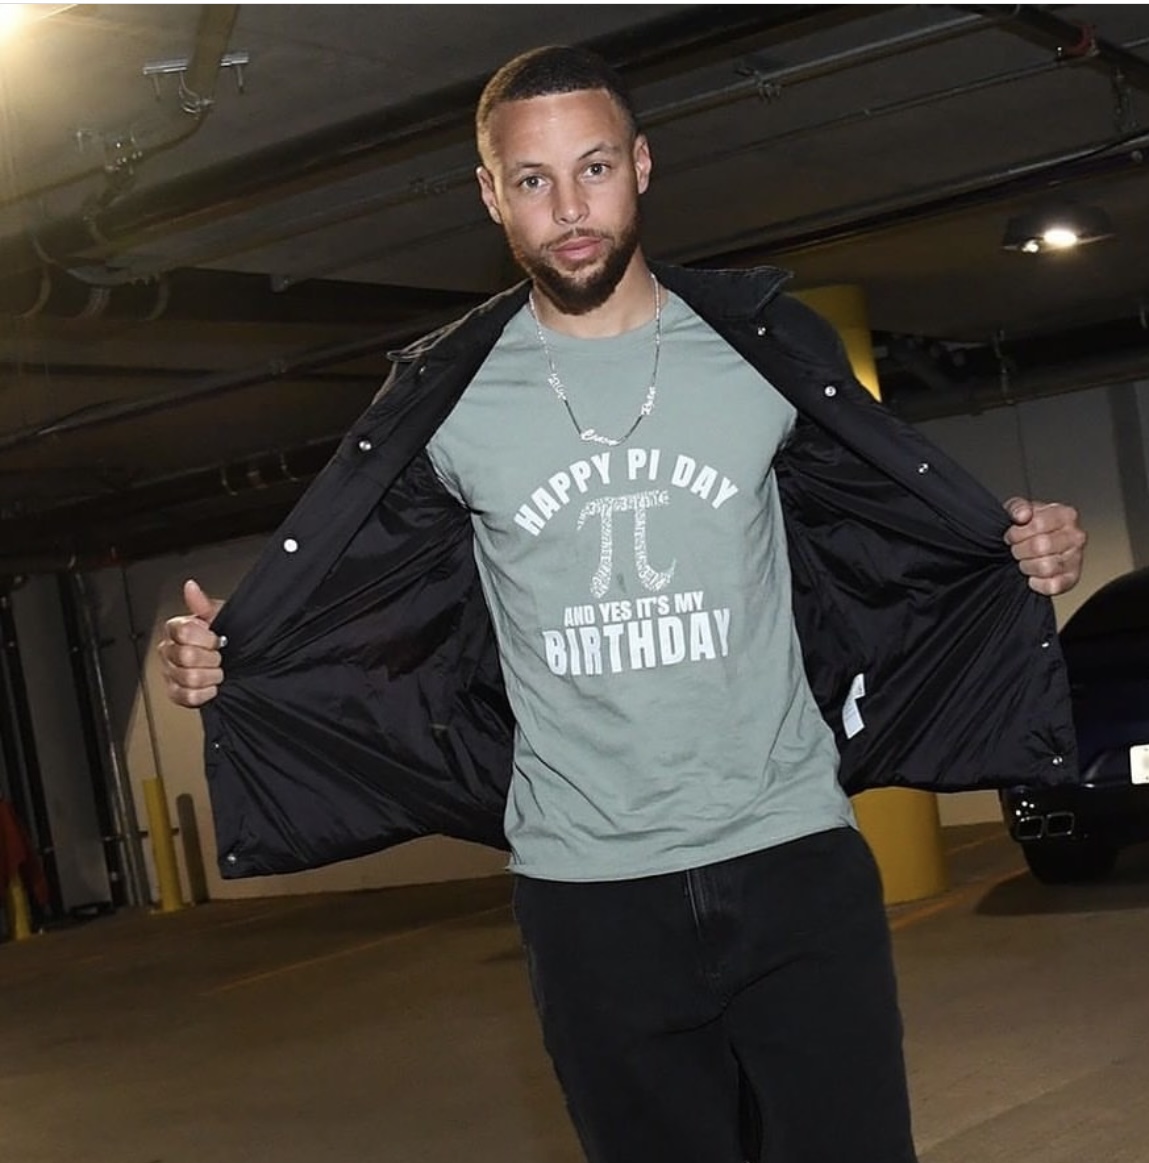 Golden State Warriors on X: 13 years after entering the NBA, Stephen Curry  is a college grad. Stephen completed his final semester of coursework this  spring and will receive a Bachelor of